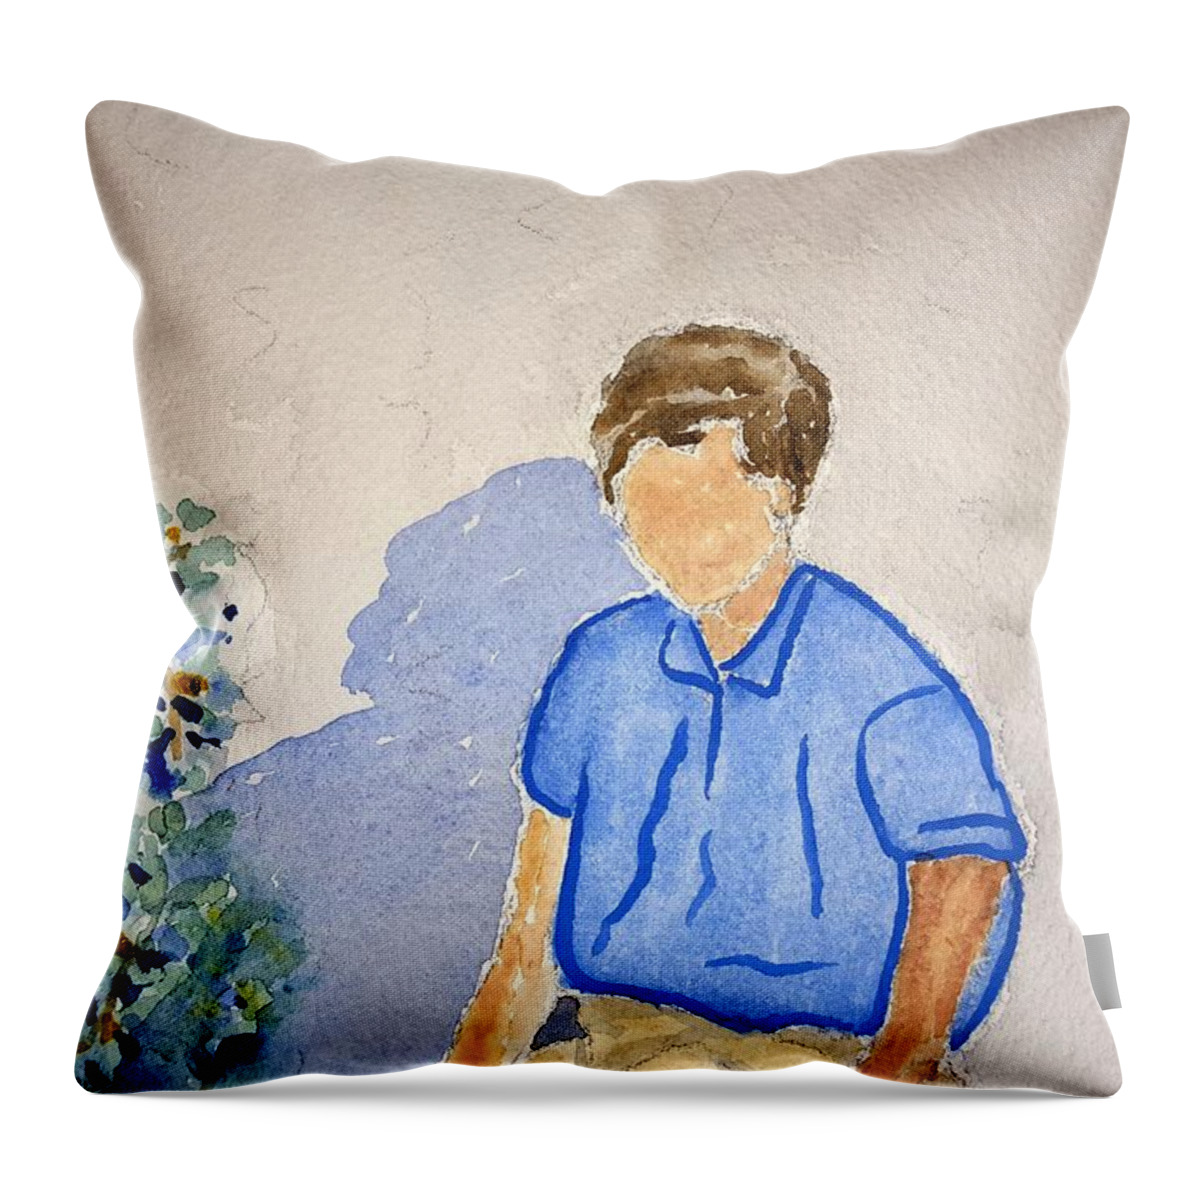 Watercolor Throw Pillow featuring the painting Norma by John Klobucher